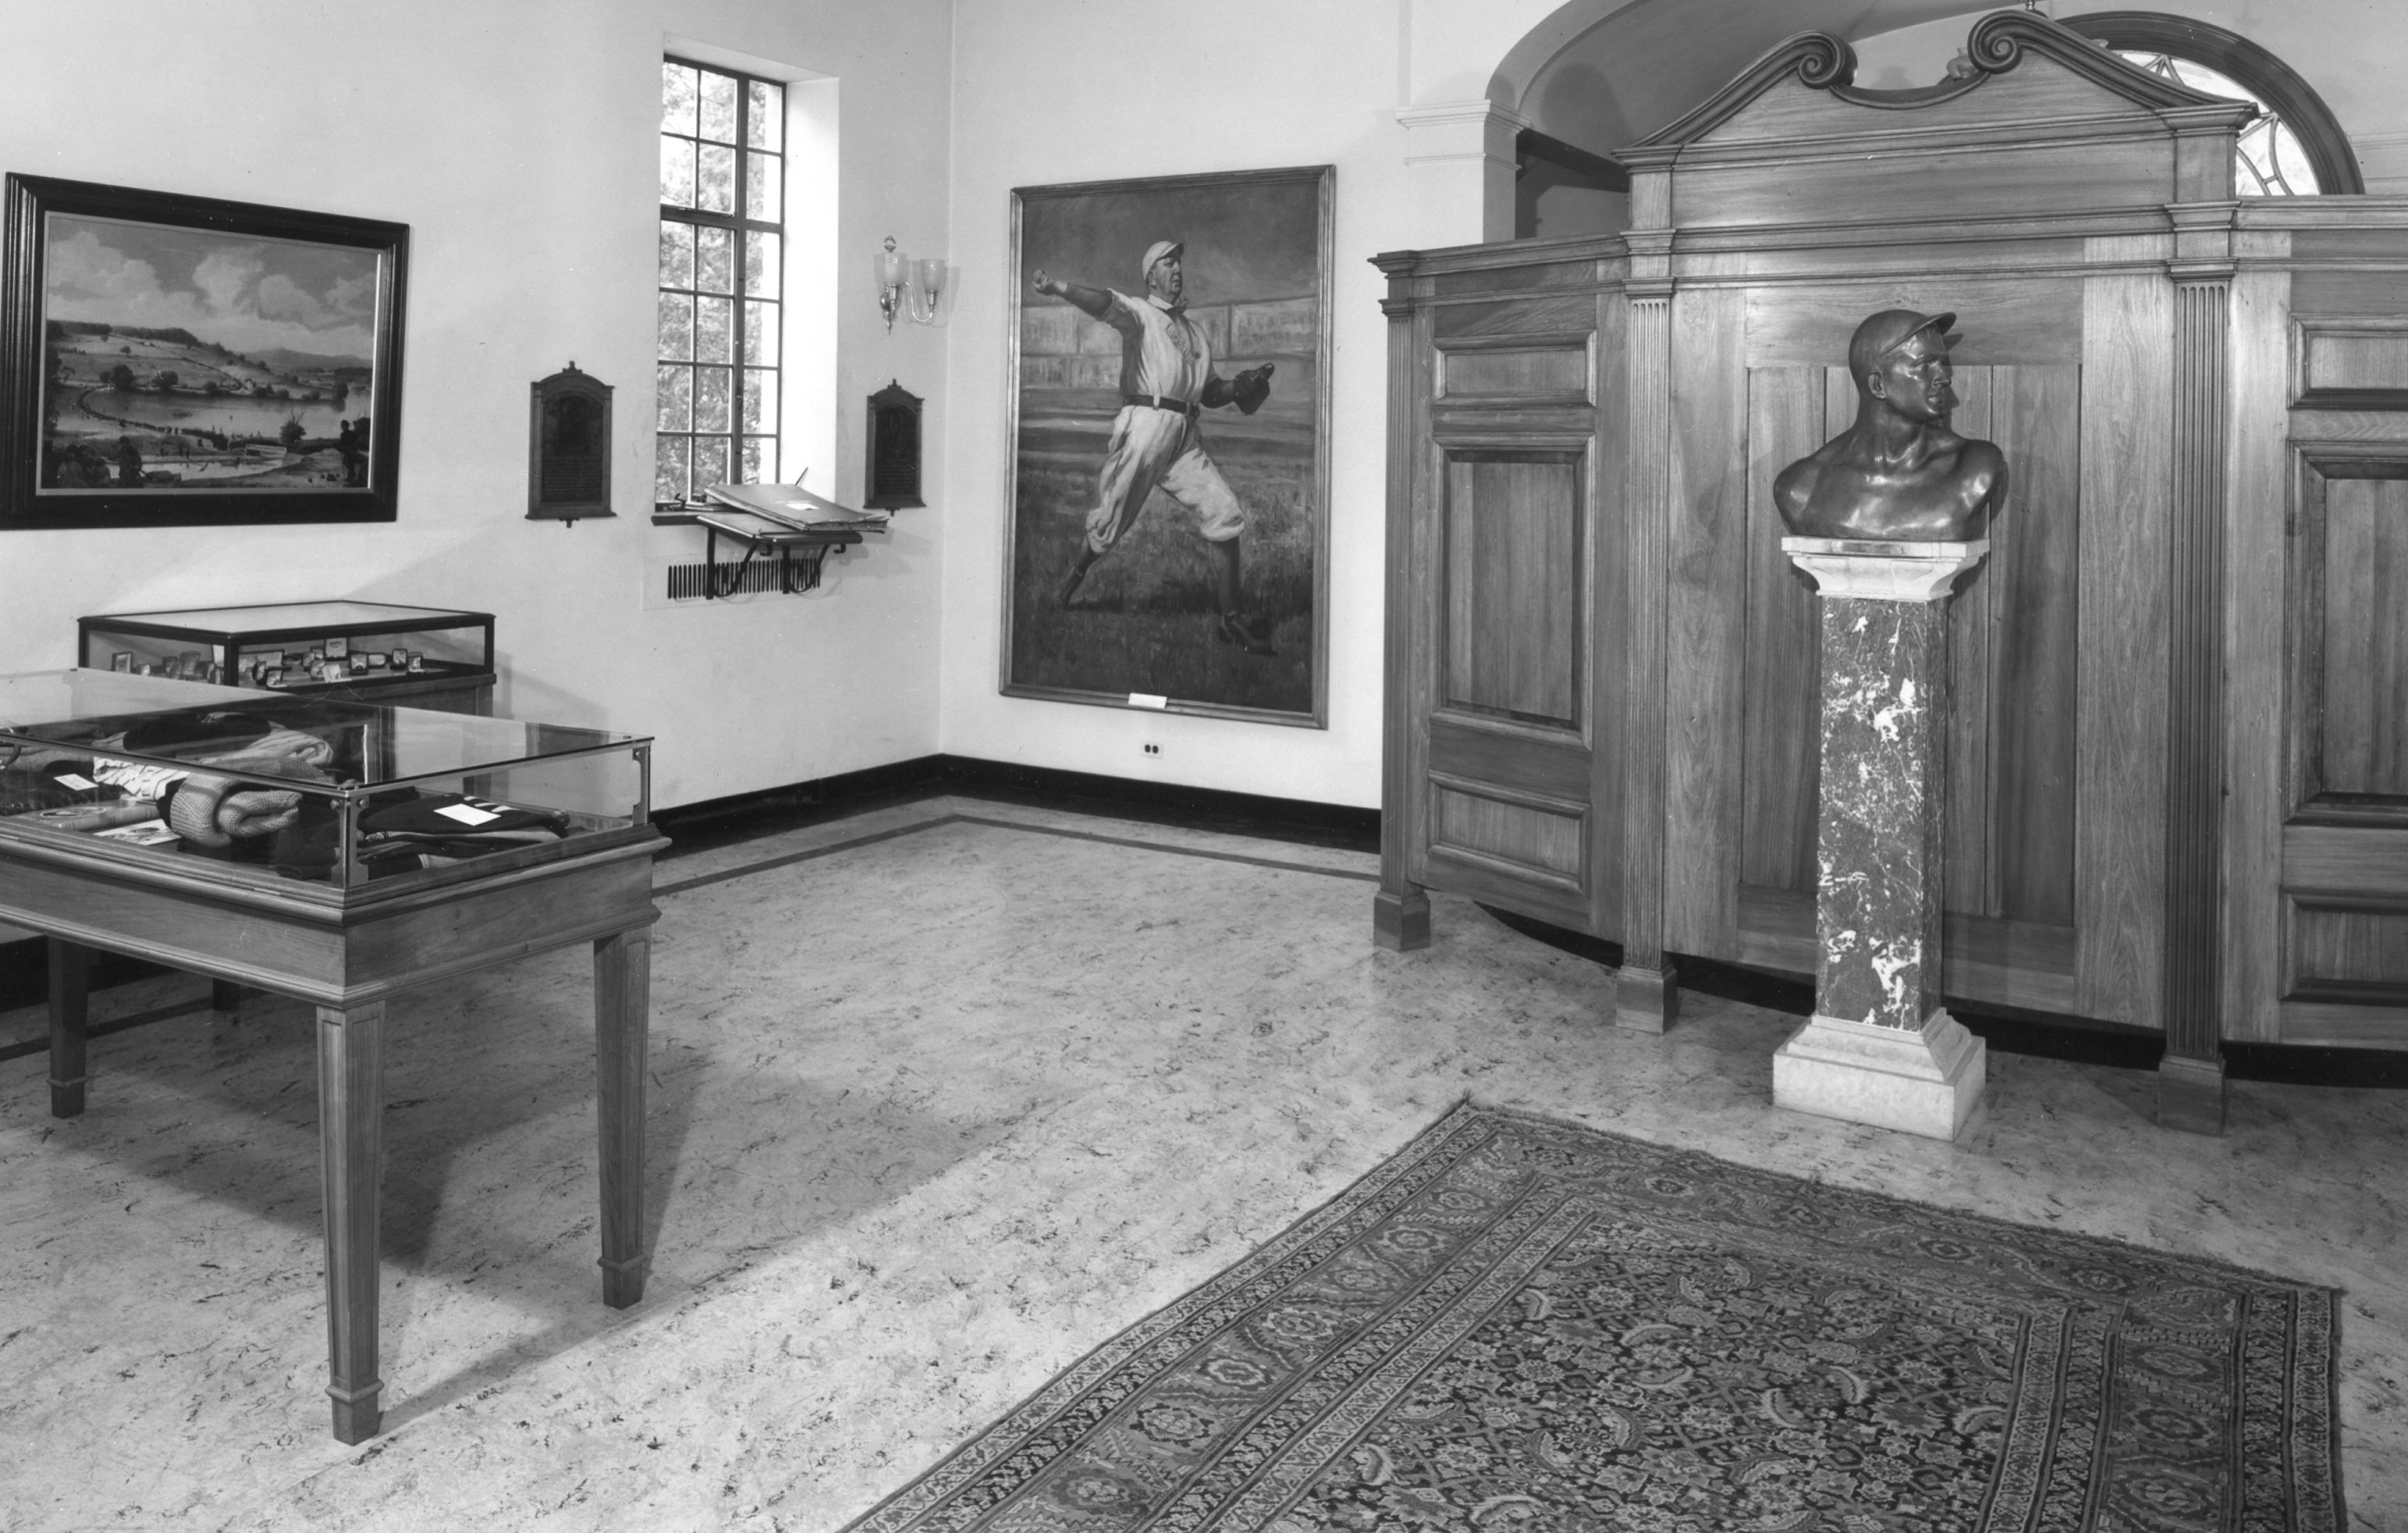 Image of the Museum in 1939